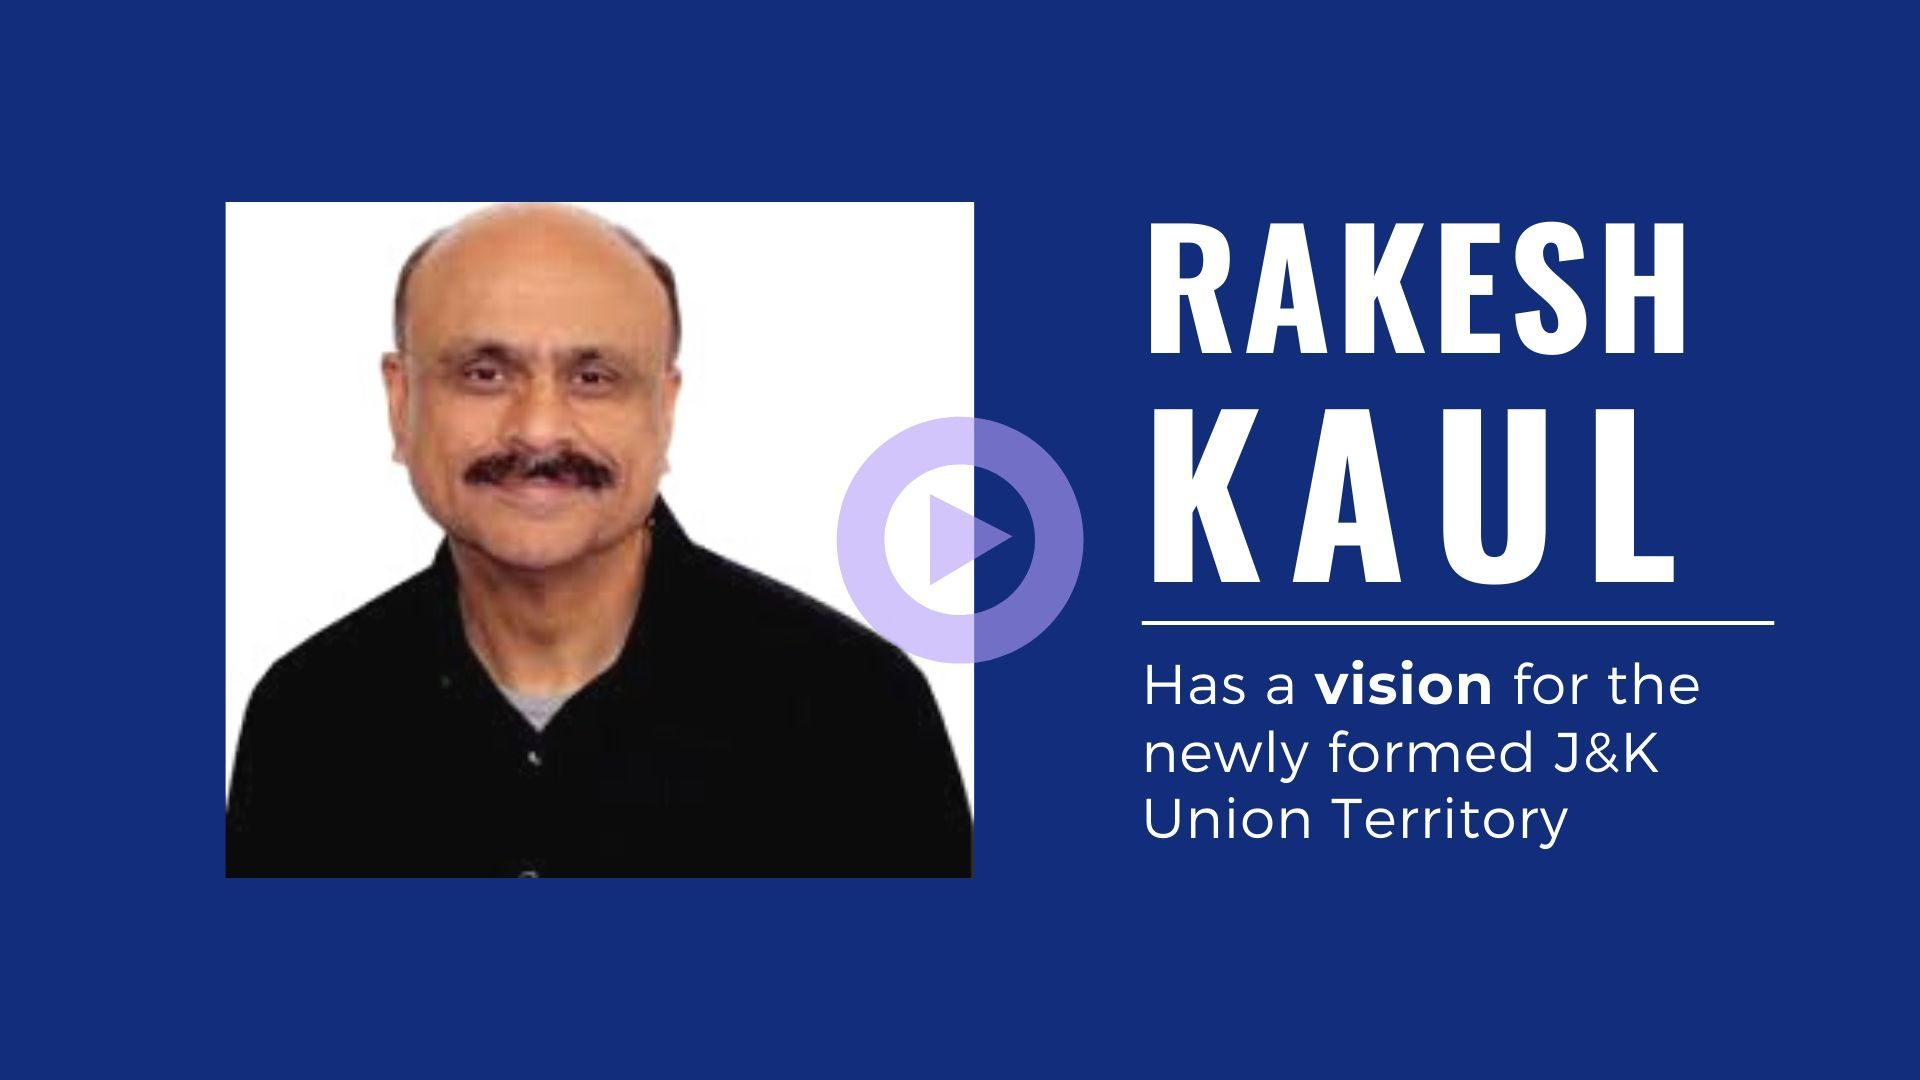 From restoring the properties of Kashmiri Pandits to making the valley vibrant again, Author and Activist Rakesh Kaul expresses optimism that the Modi Government will fulfill their aspirations.